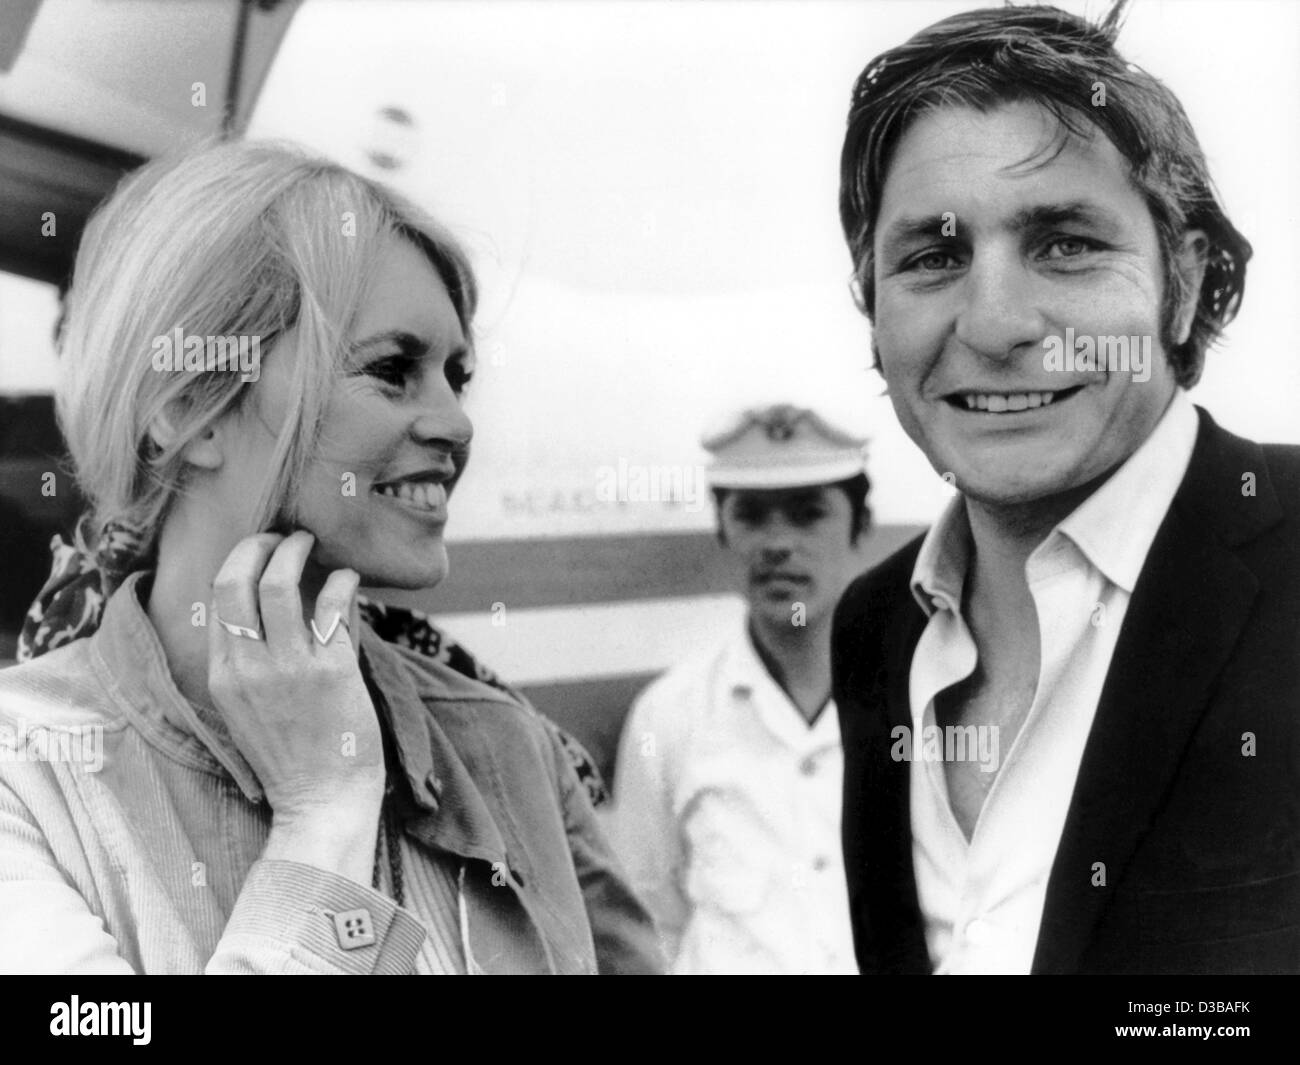 (dpa files) - The Swiss industrial heir, playboy and photographer Gunter Sachs accompanies his then wife Brigitte Bardot at the airport in Marbella, Spain, 10 April 1968. The great grand son of Adam Opel will celebrate his 70th birthday on 14.11.2002.  In the 60's Sachs created a sensation as a play Stock Photo